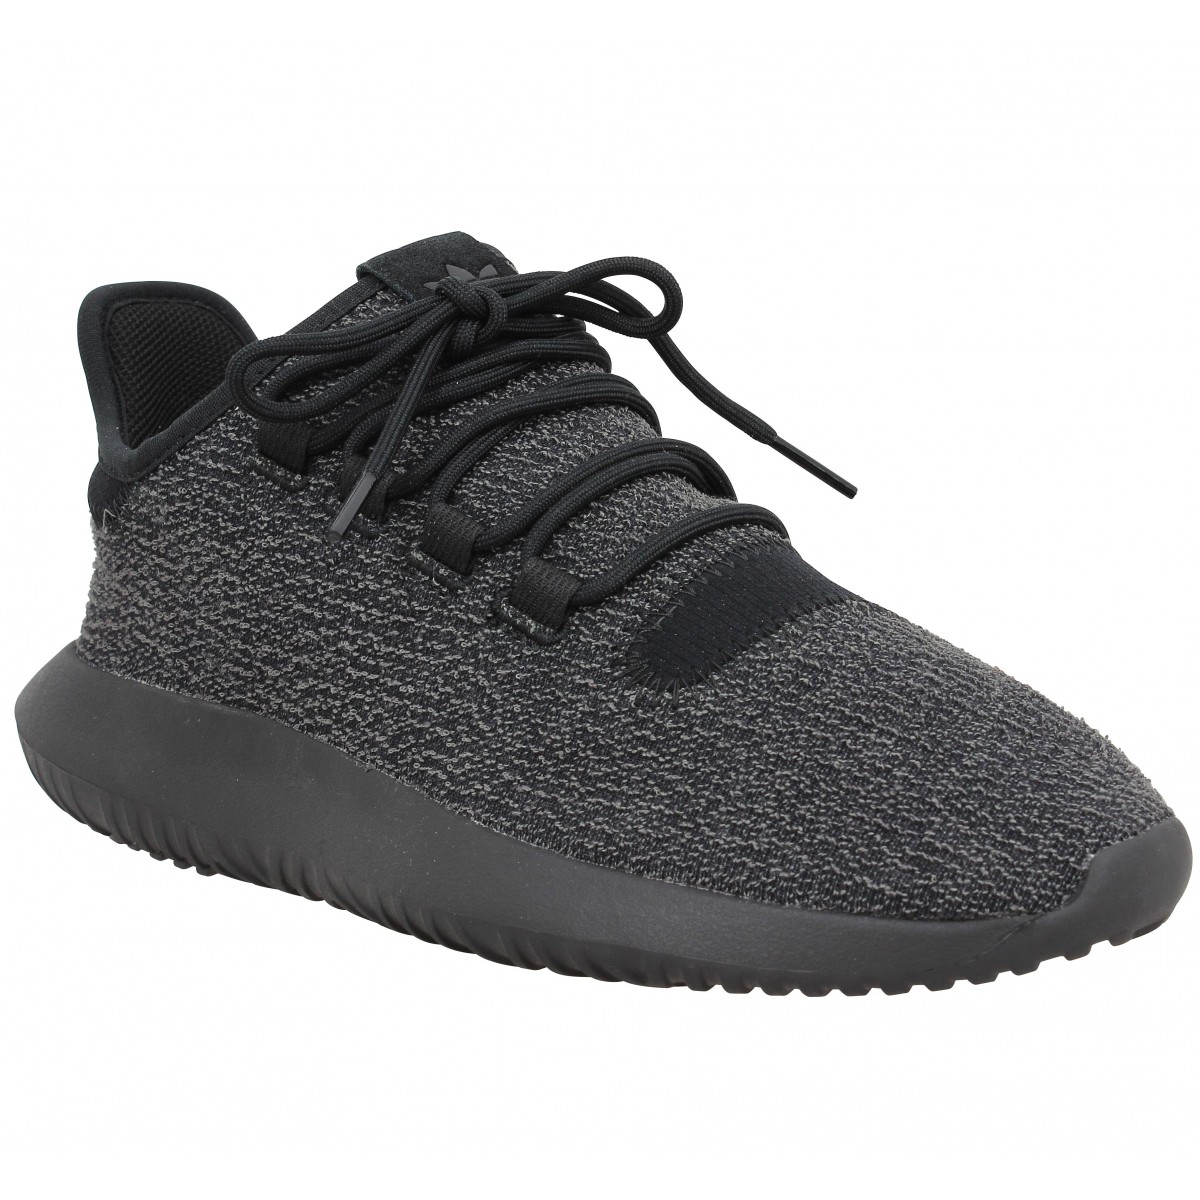 Chaussures Adidas tubular shadow toile homme black homme | Fanny chaussures